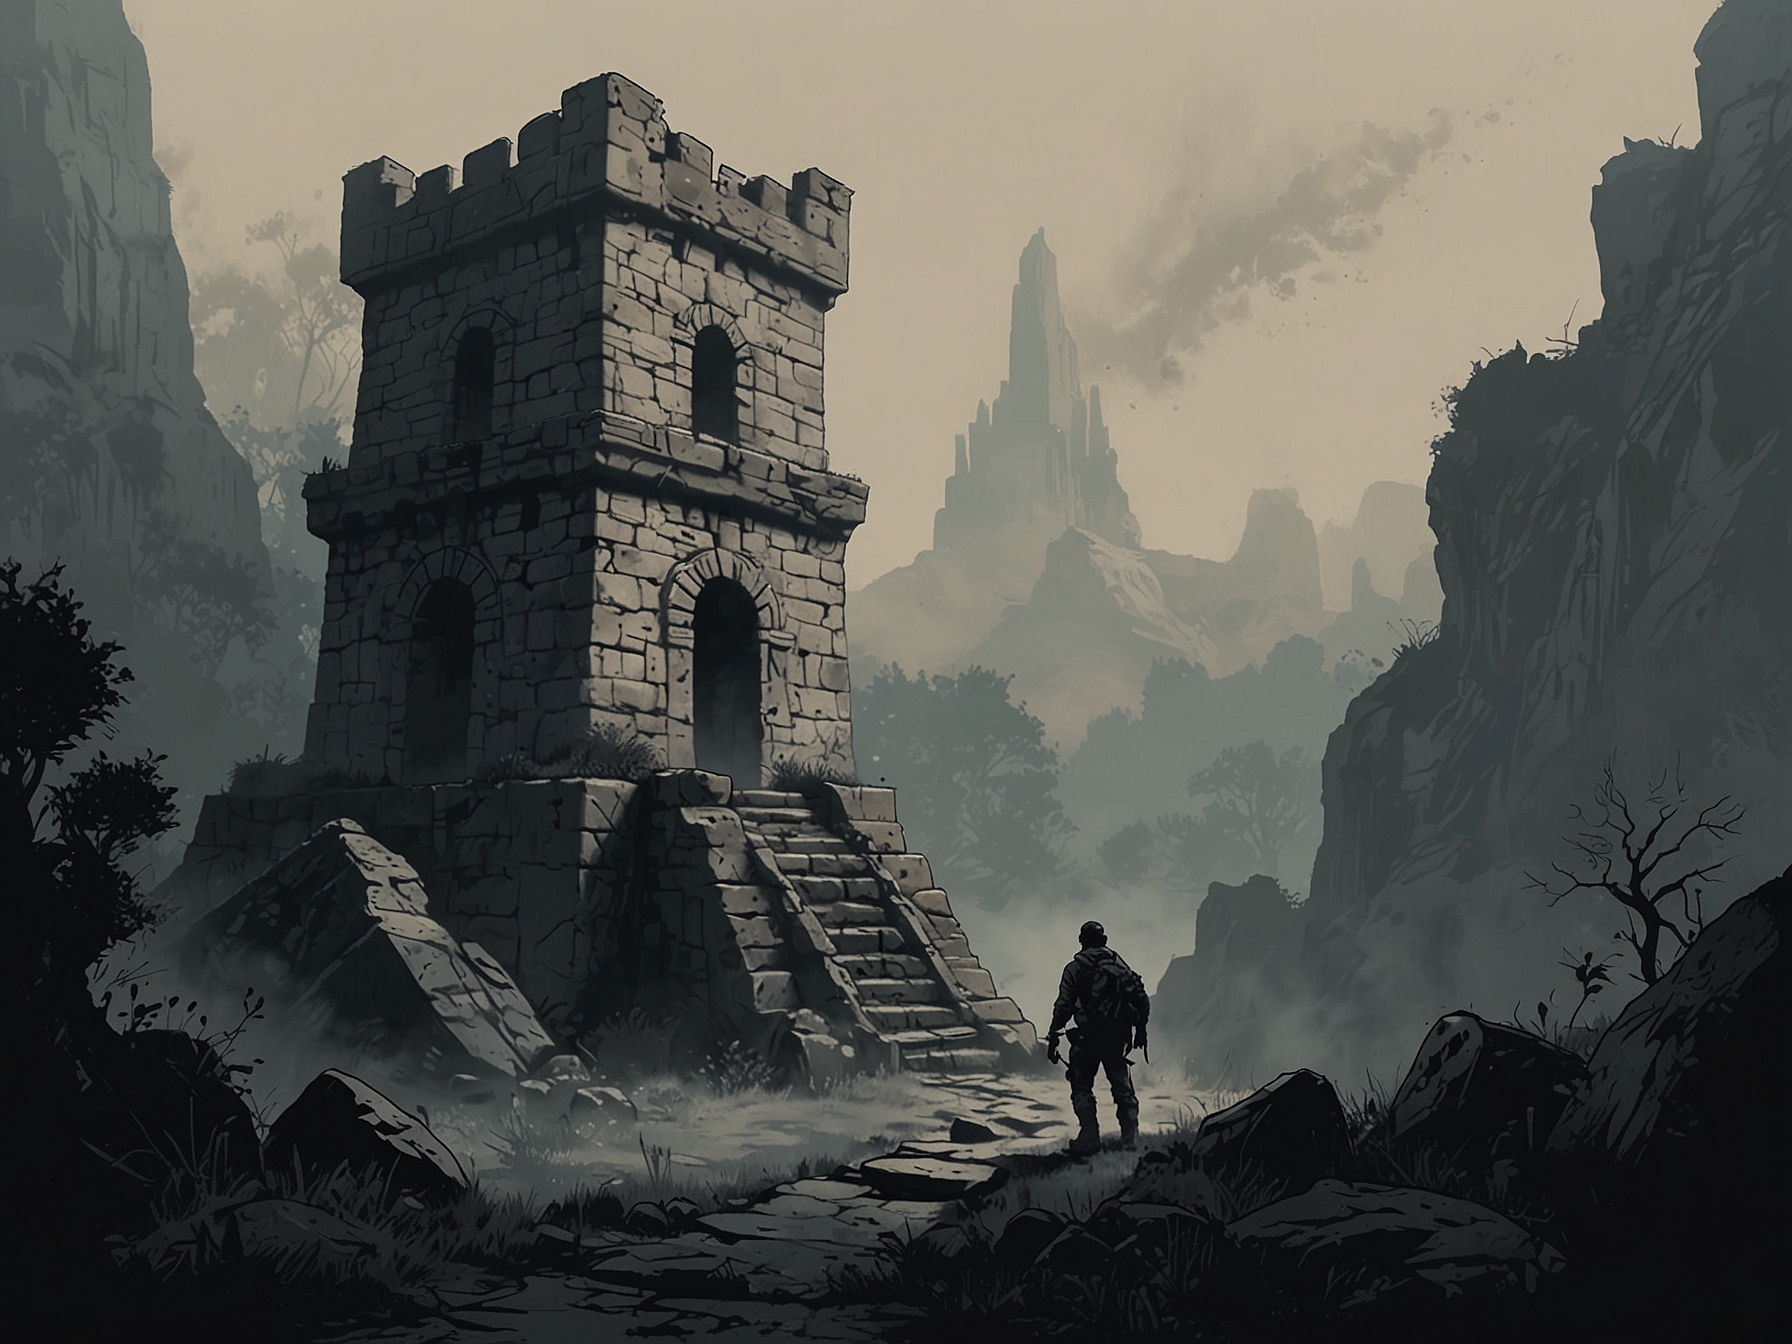 An adventurer traverses the eerie Mistwood Ruins shrouded in dense fog, looking for the hidden entrance marked by an intricate carving at the base of a stone tower.